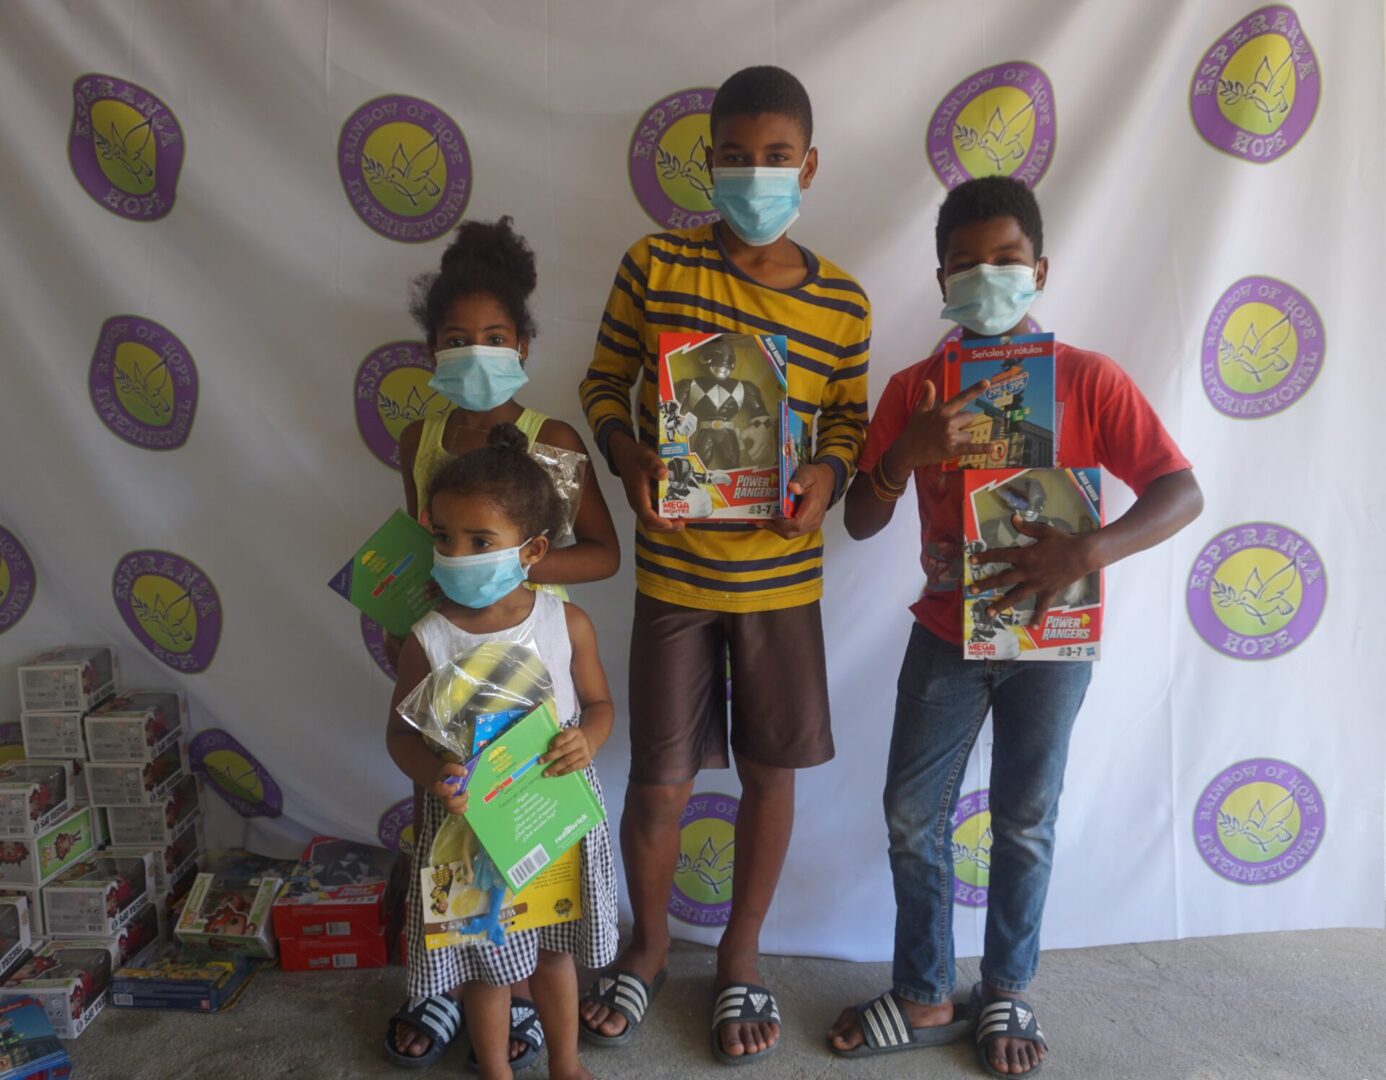 Four children standing against the Esperanza-Hope backdrop with their toys and books, batch 3